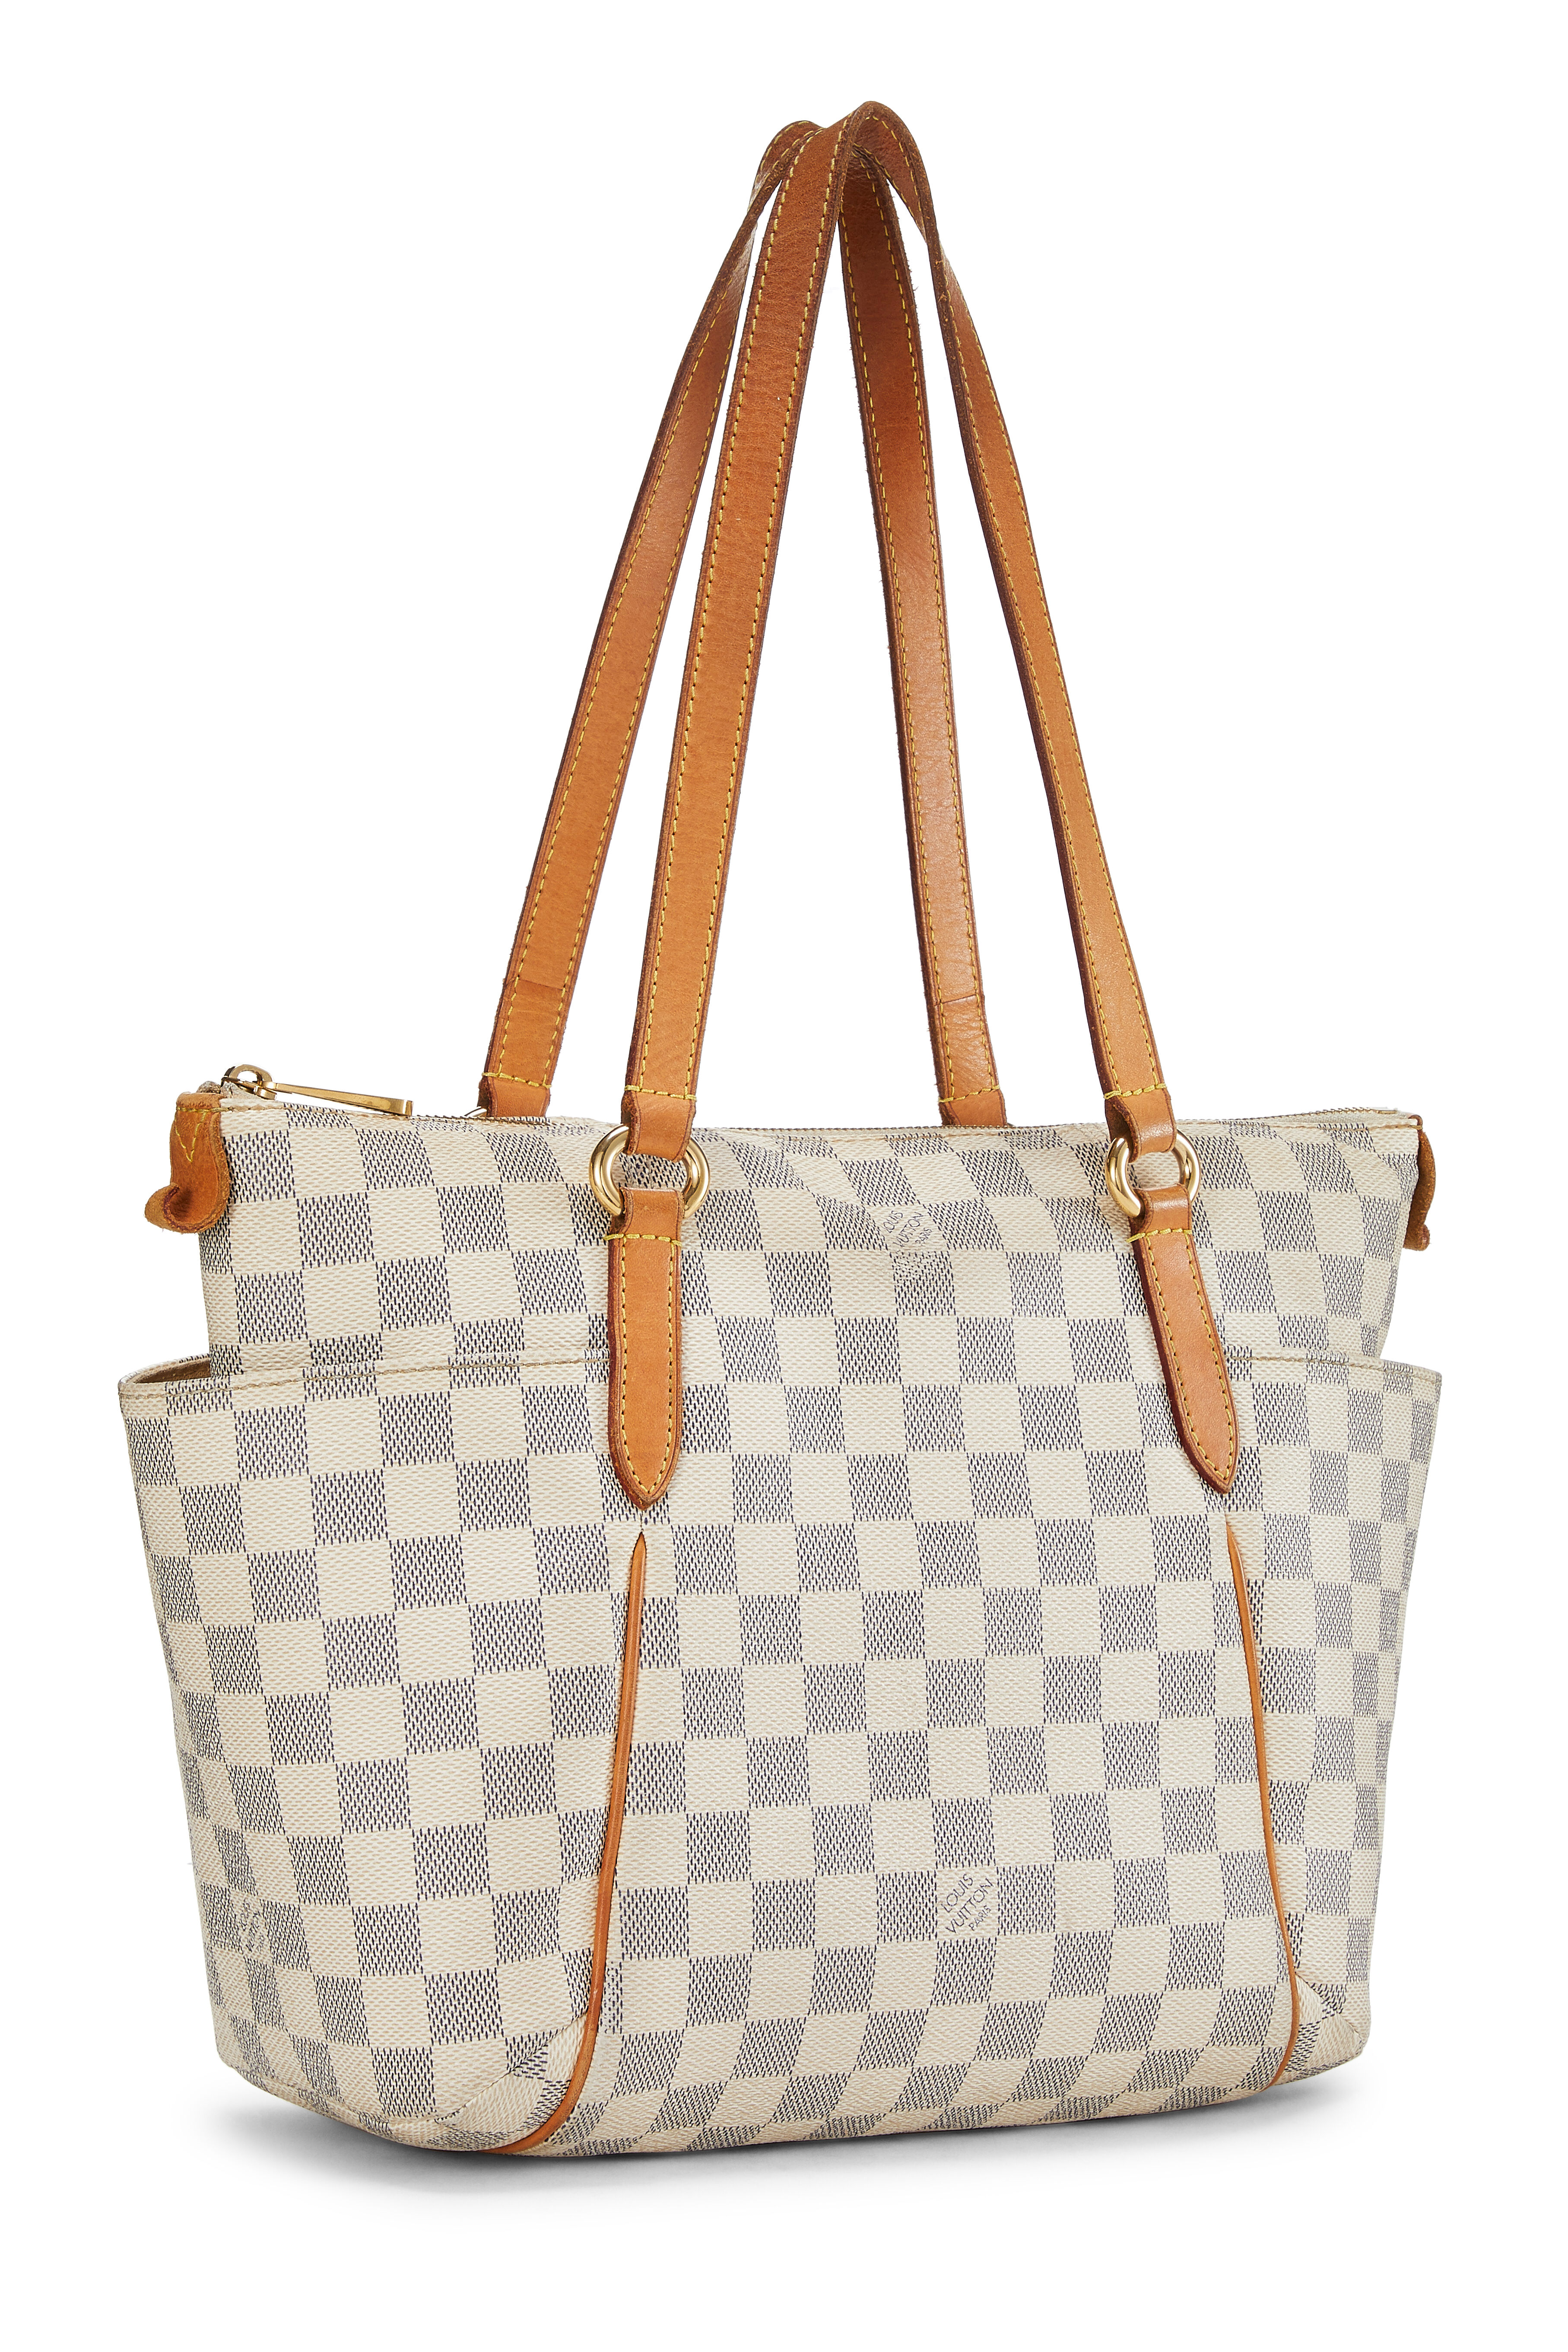 Louis Vuitton Damier Azur Totally PM - What Goes Around Comes 